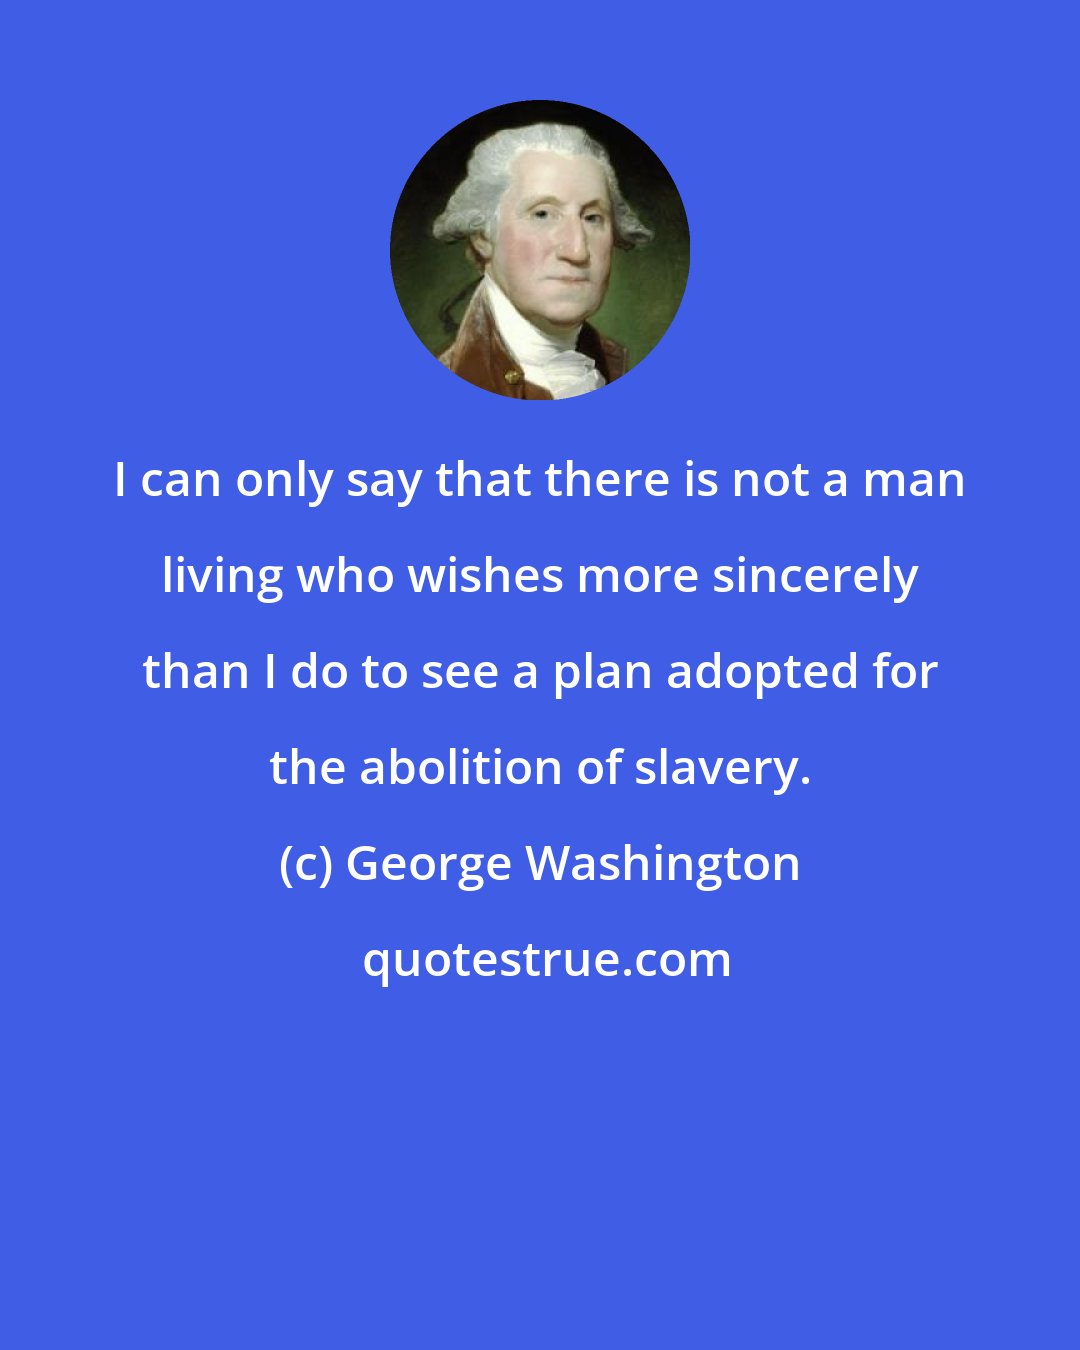 George Washington: I can only say that there is not a man living who wishes more sincerely than I do to see a plan adopted for the abolition of slavery.